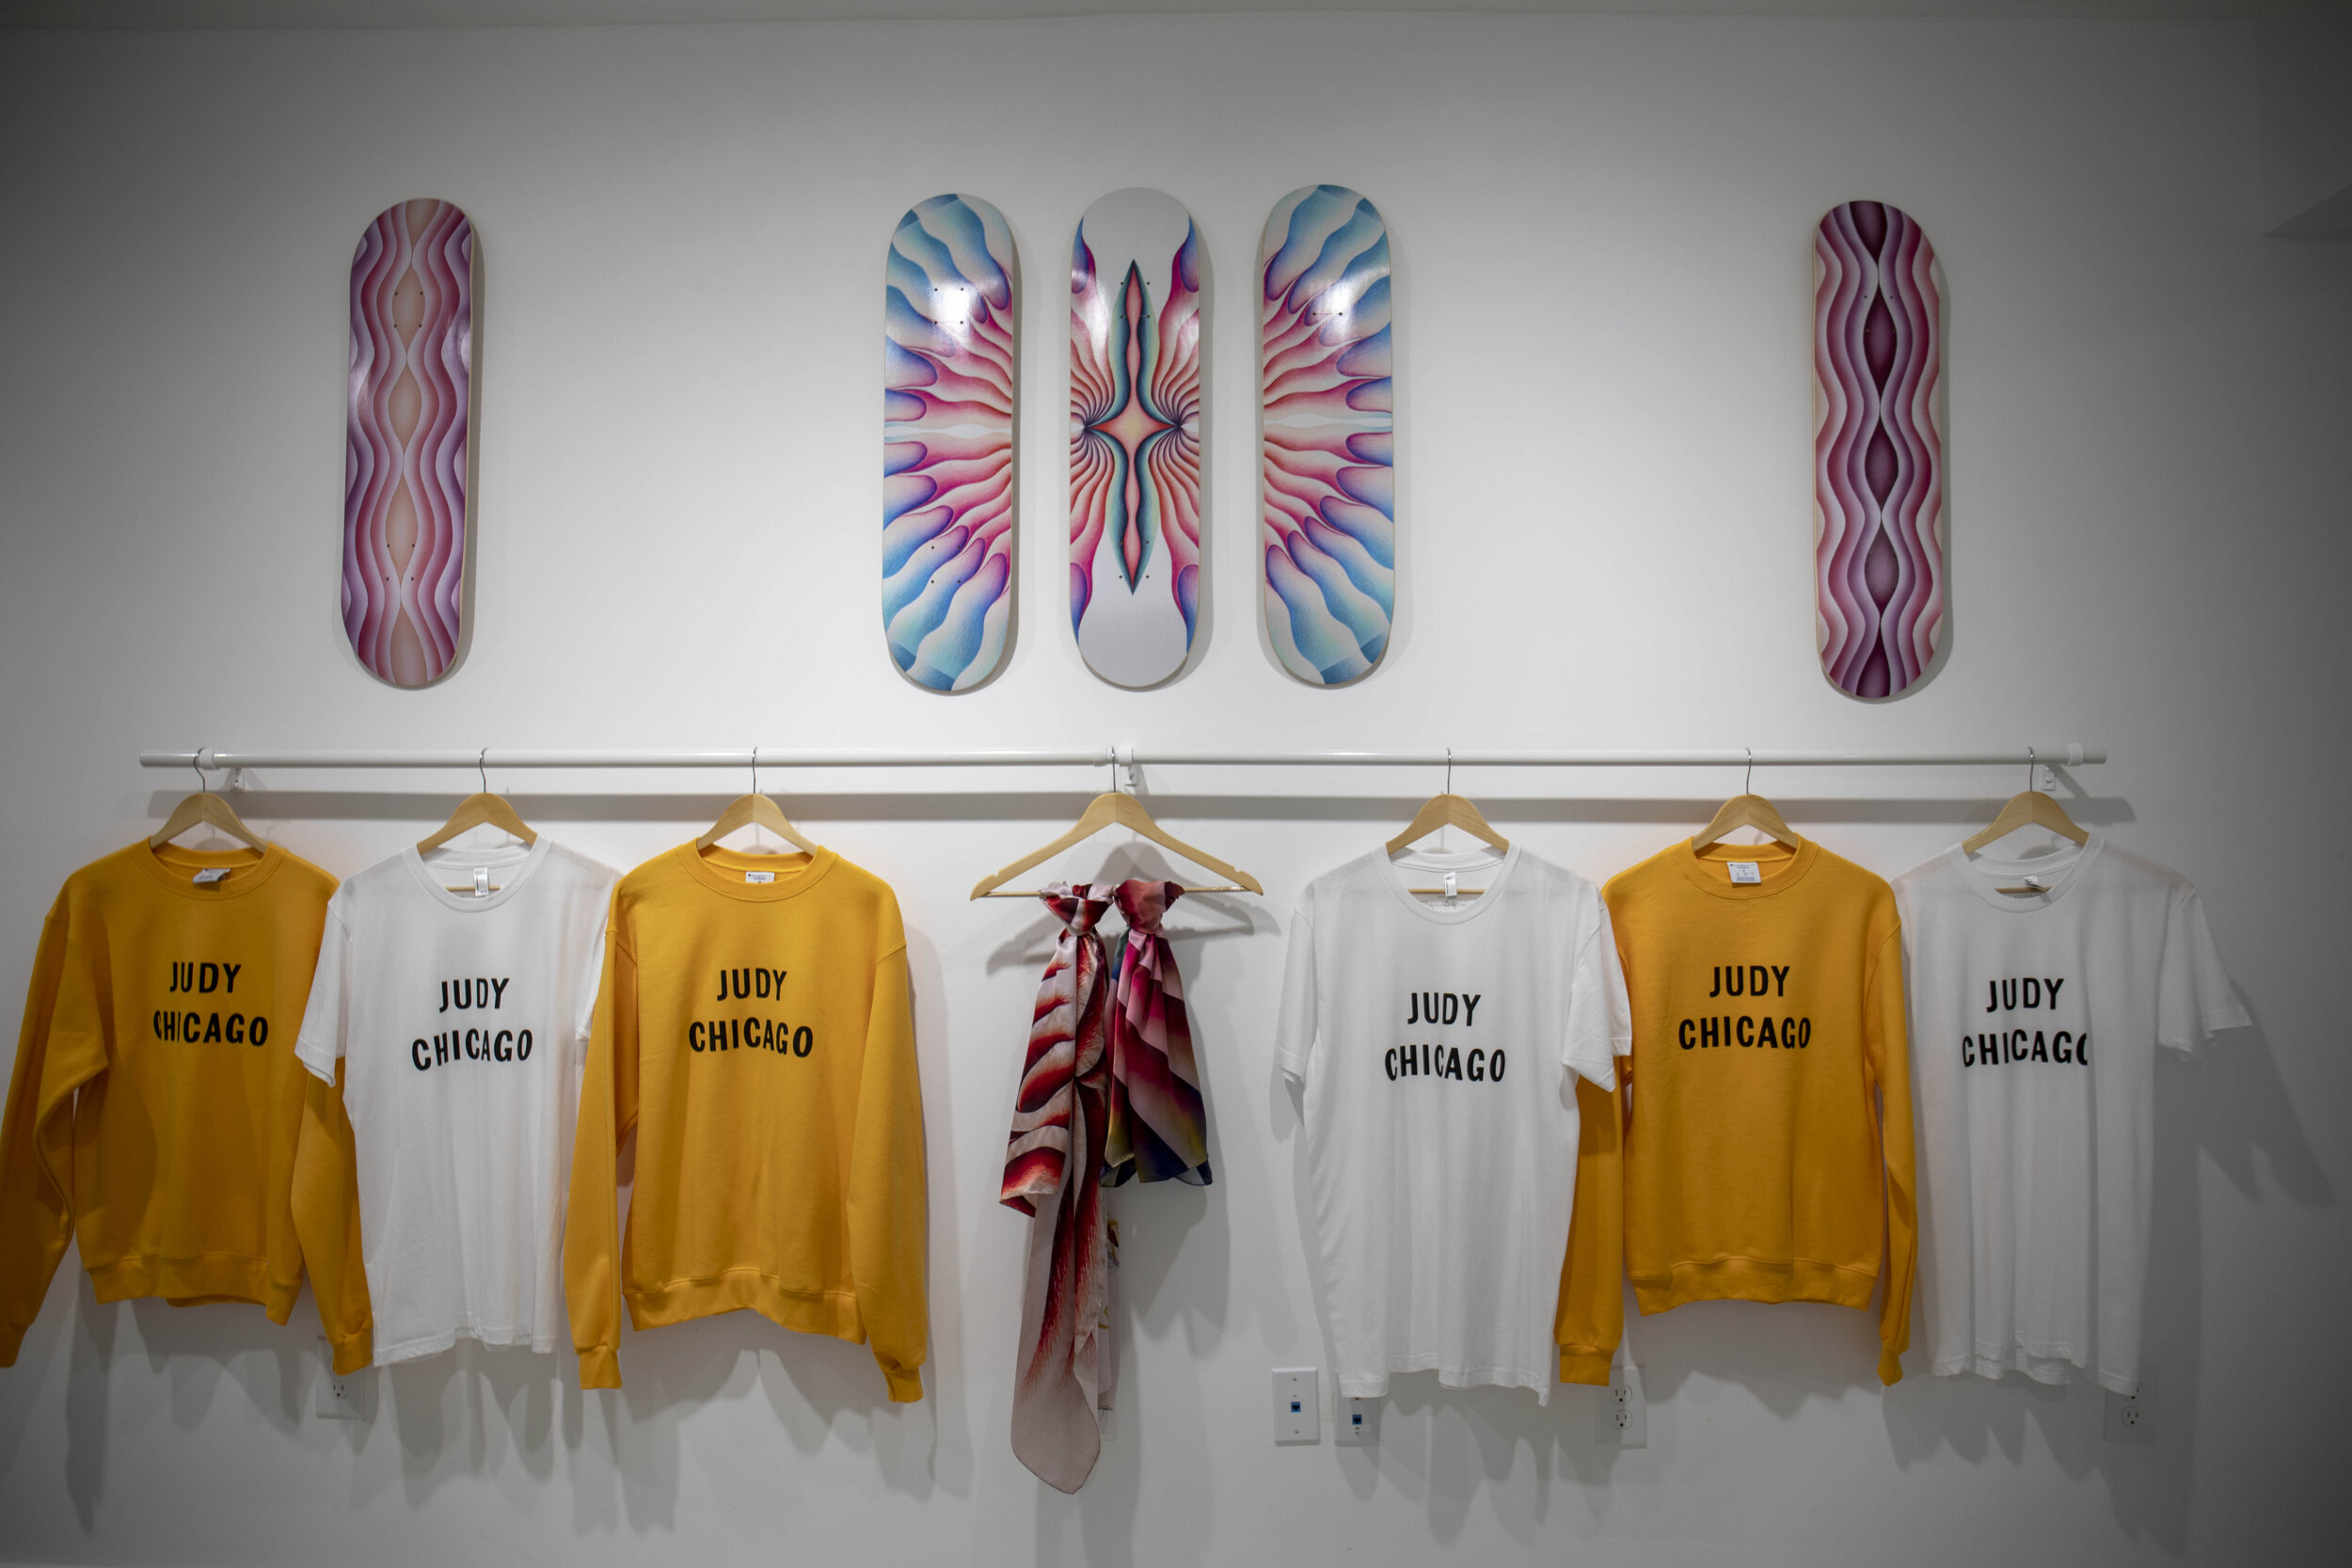  Judy Chicago sweatshirts align the wall in the shop portion of Through the Flower Art Space.  Above the sweatshirts are skate boards designed by Judy Chicago. From left to right, The Light Ripple skate board, Butterfly Ripple skateboard, and the Dar